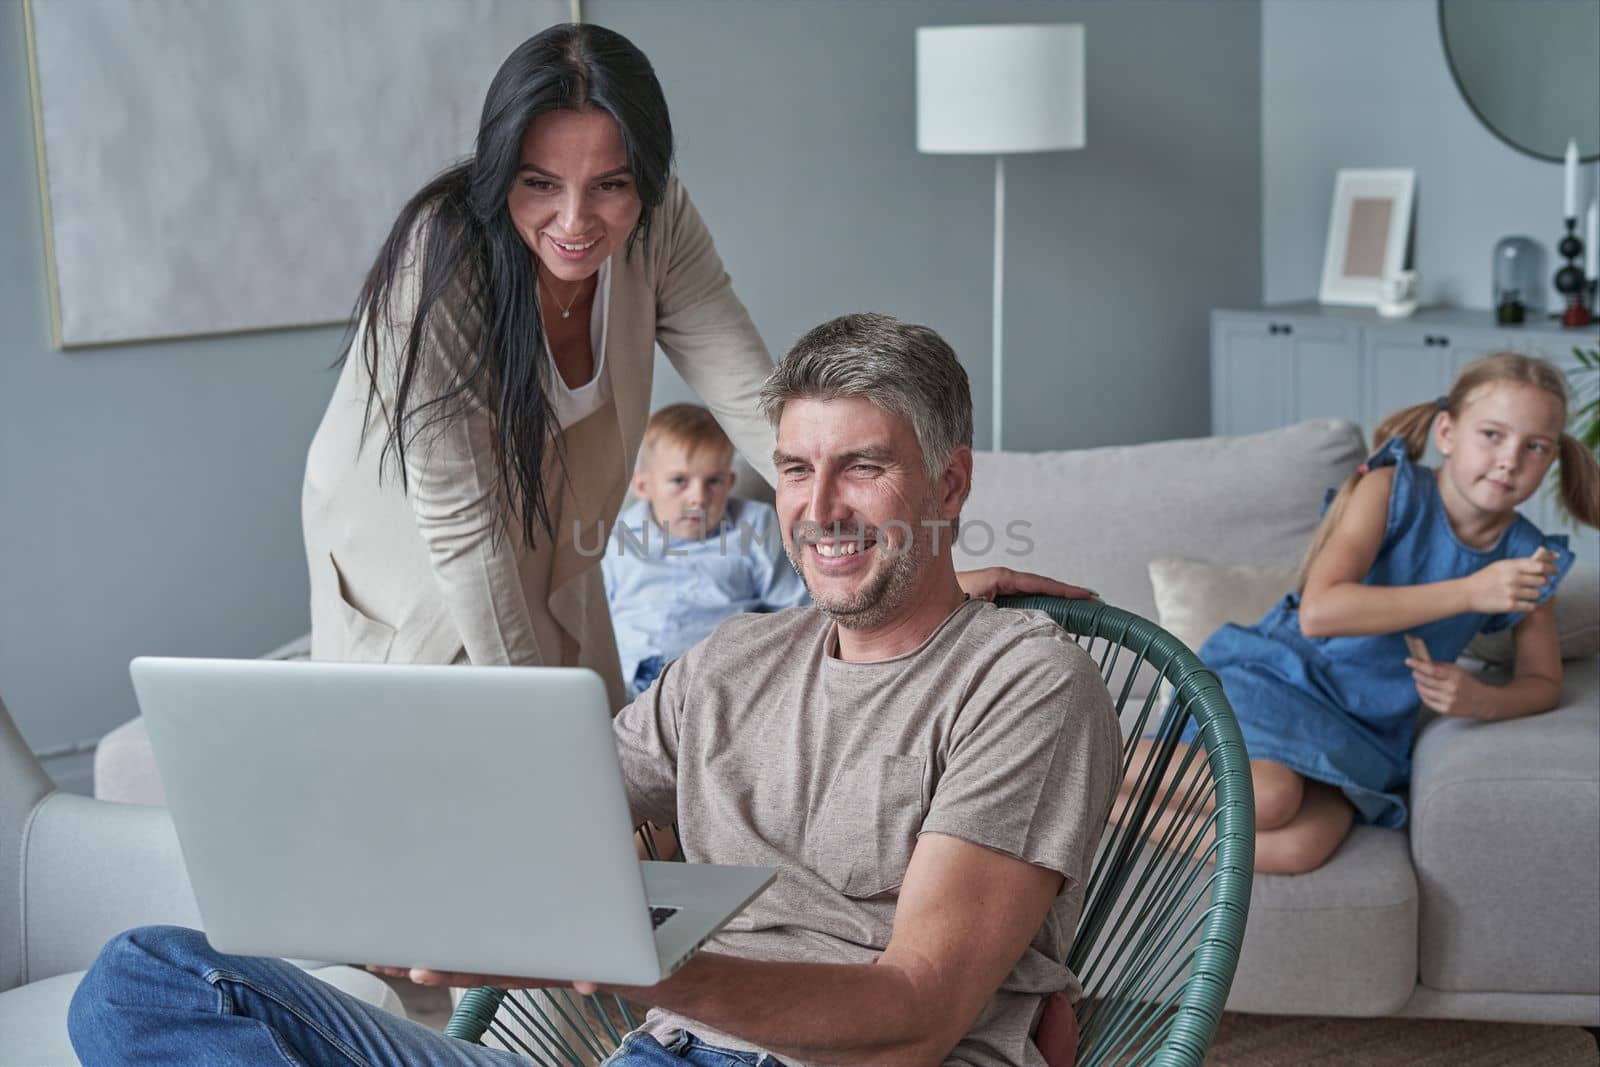 mom and dad use laptop while their kids relax on the couch by asdf